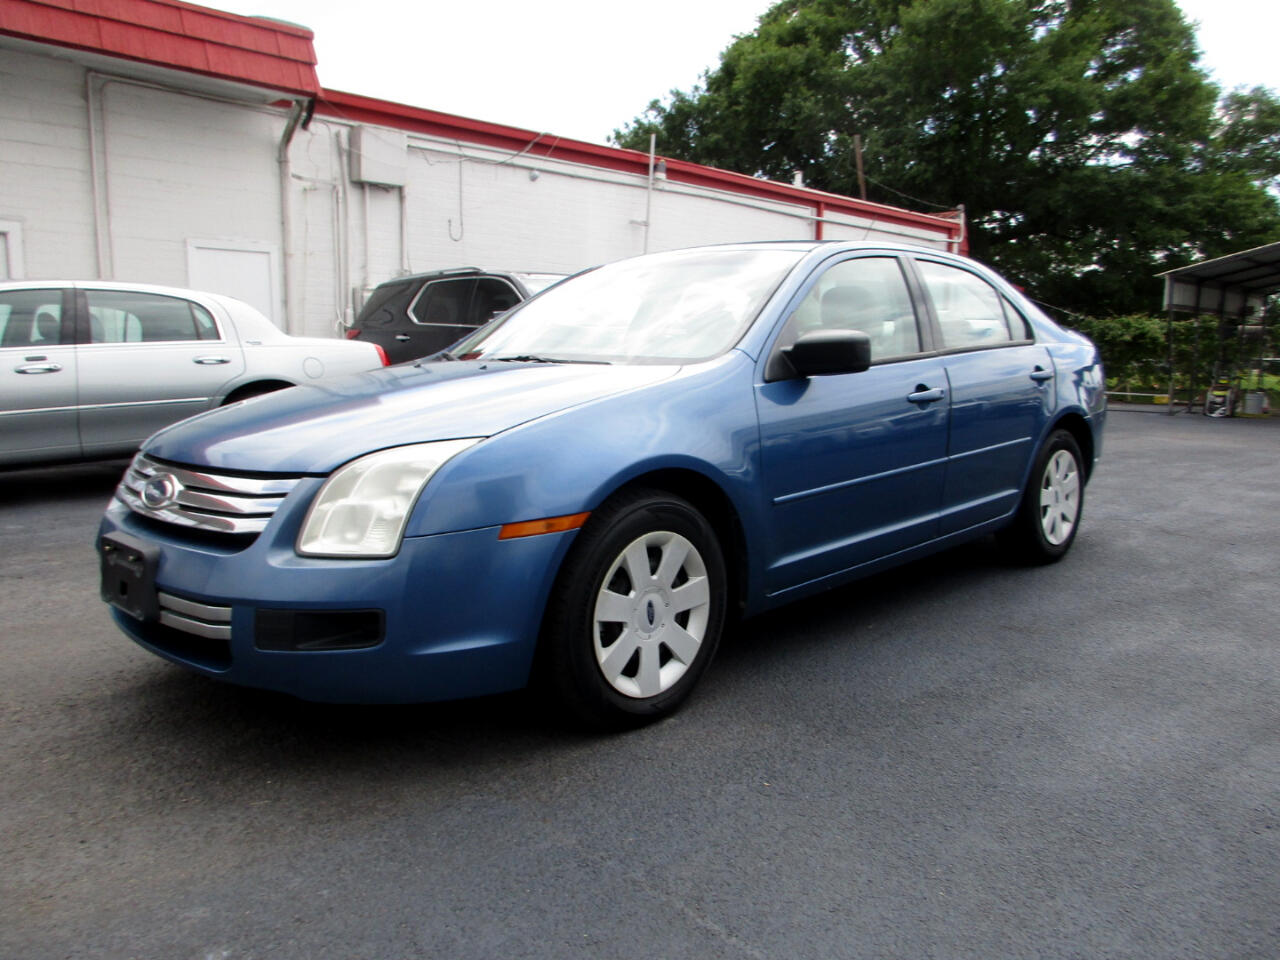 Ford Fusion 4dr Sdn I4 S FWD 2009